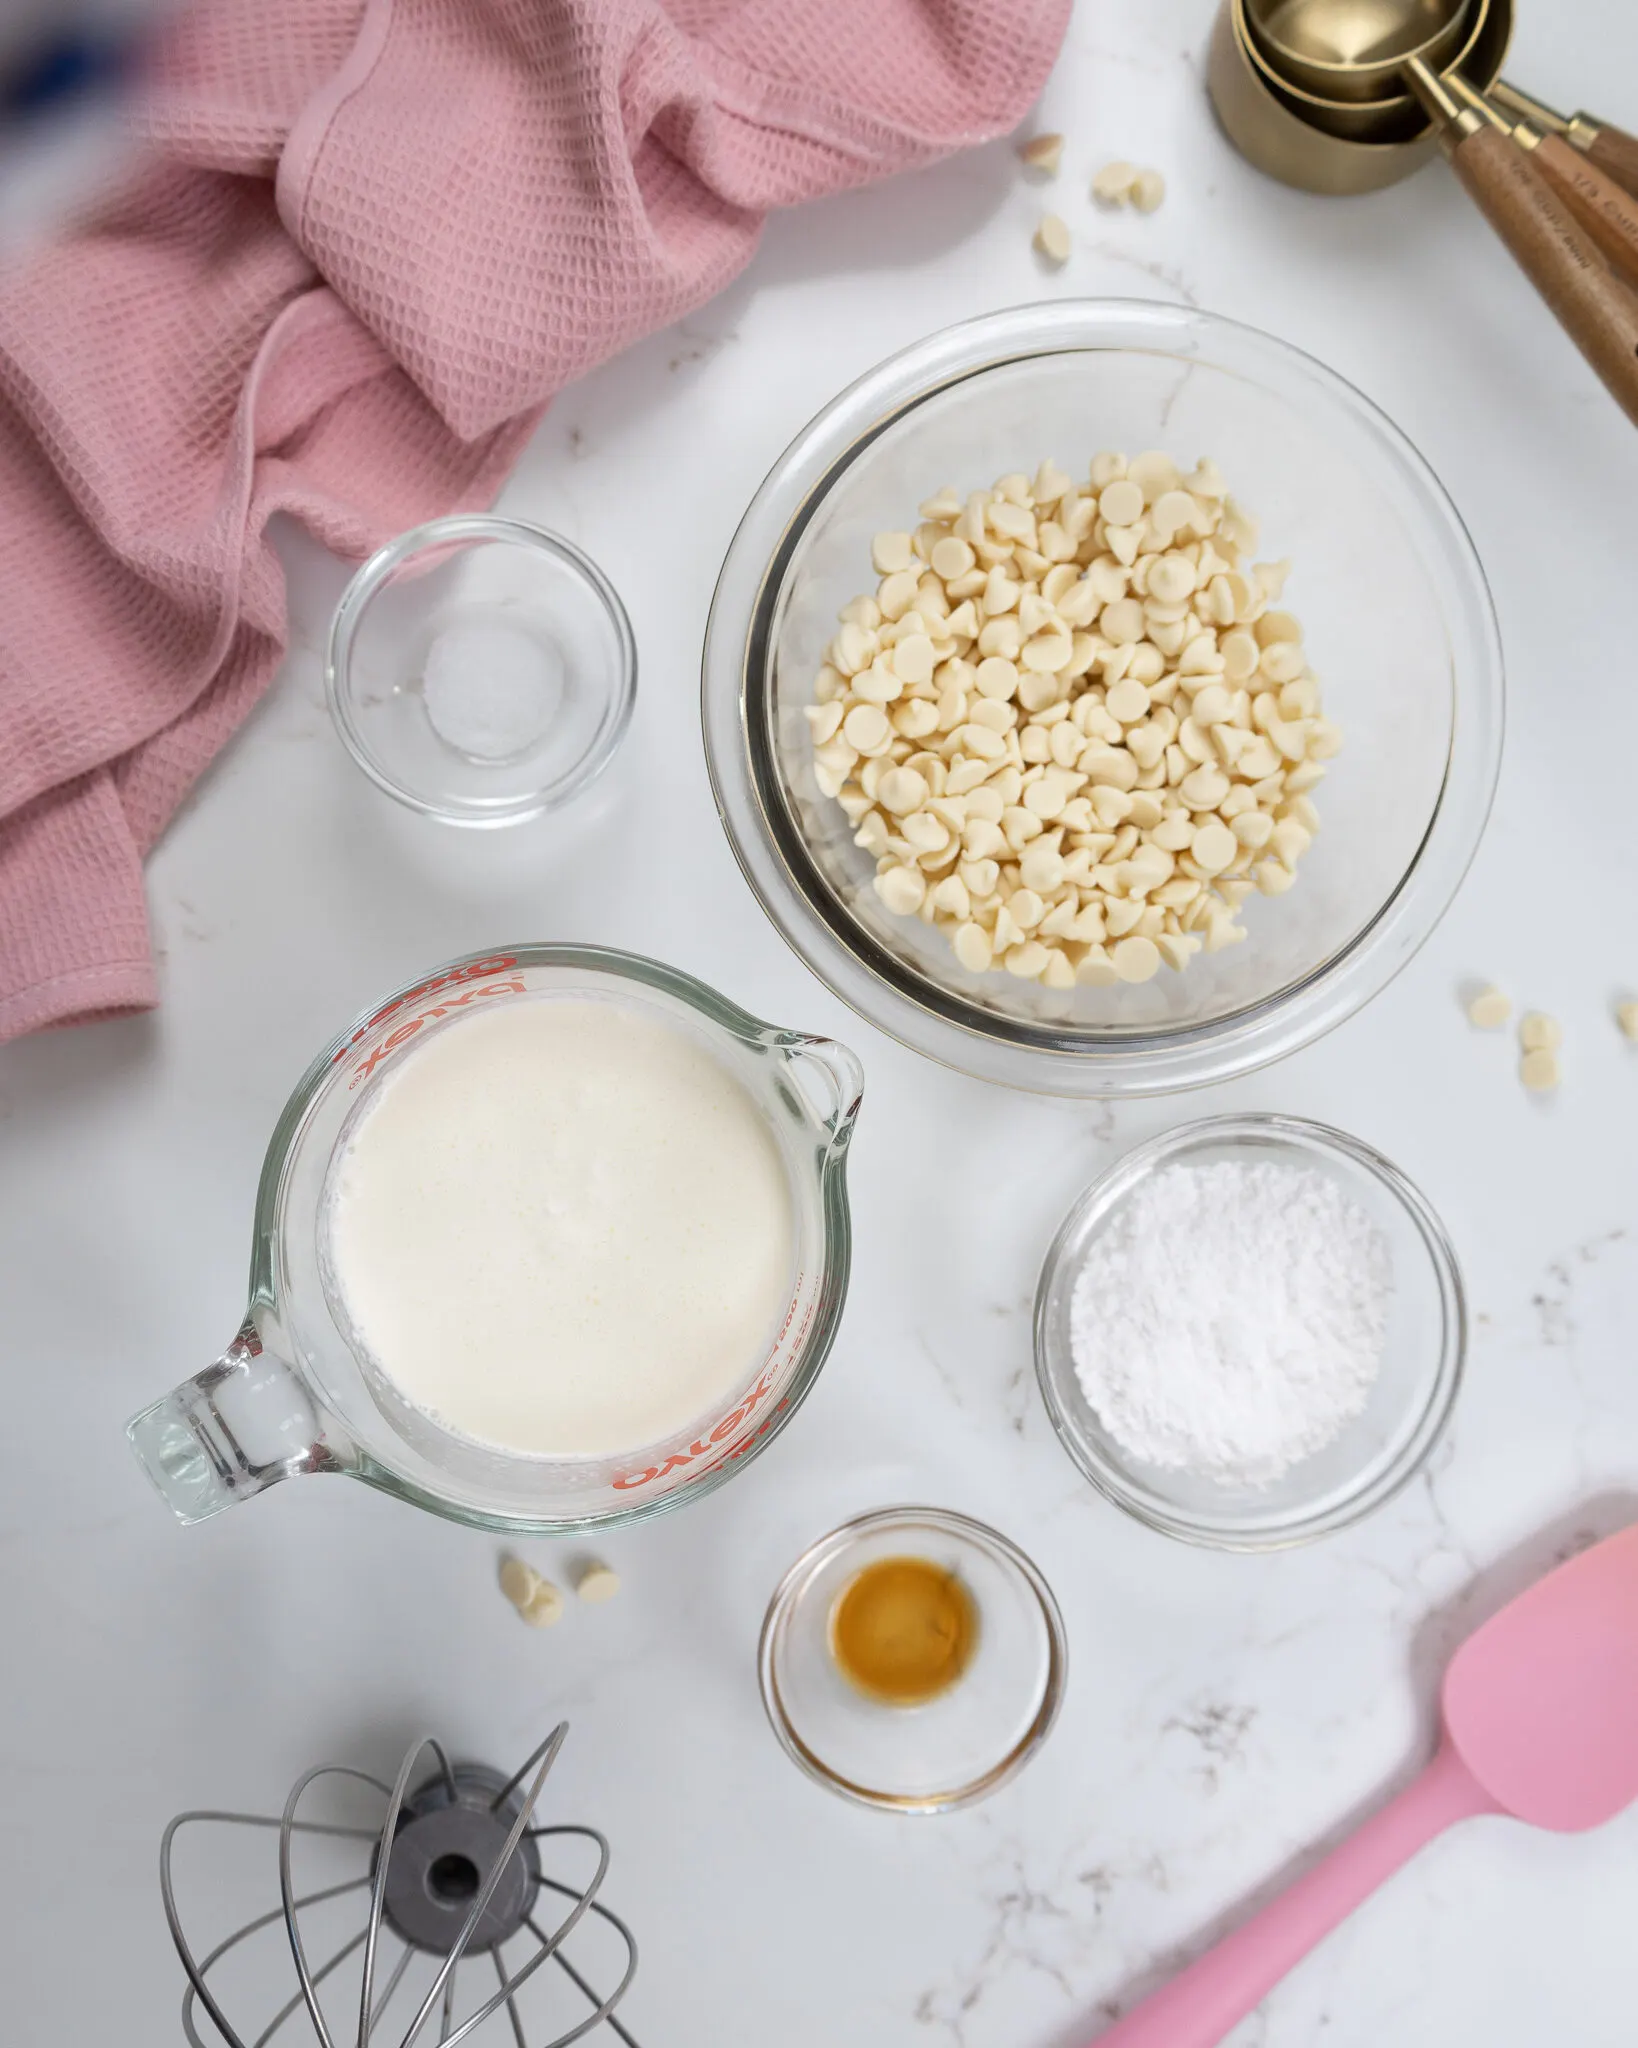 image of ingredients laid out to make a white chocolate mousse cake filling